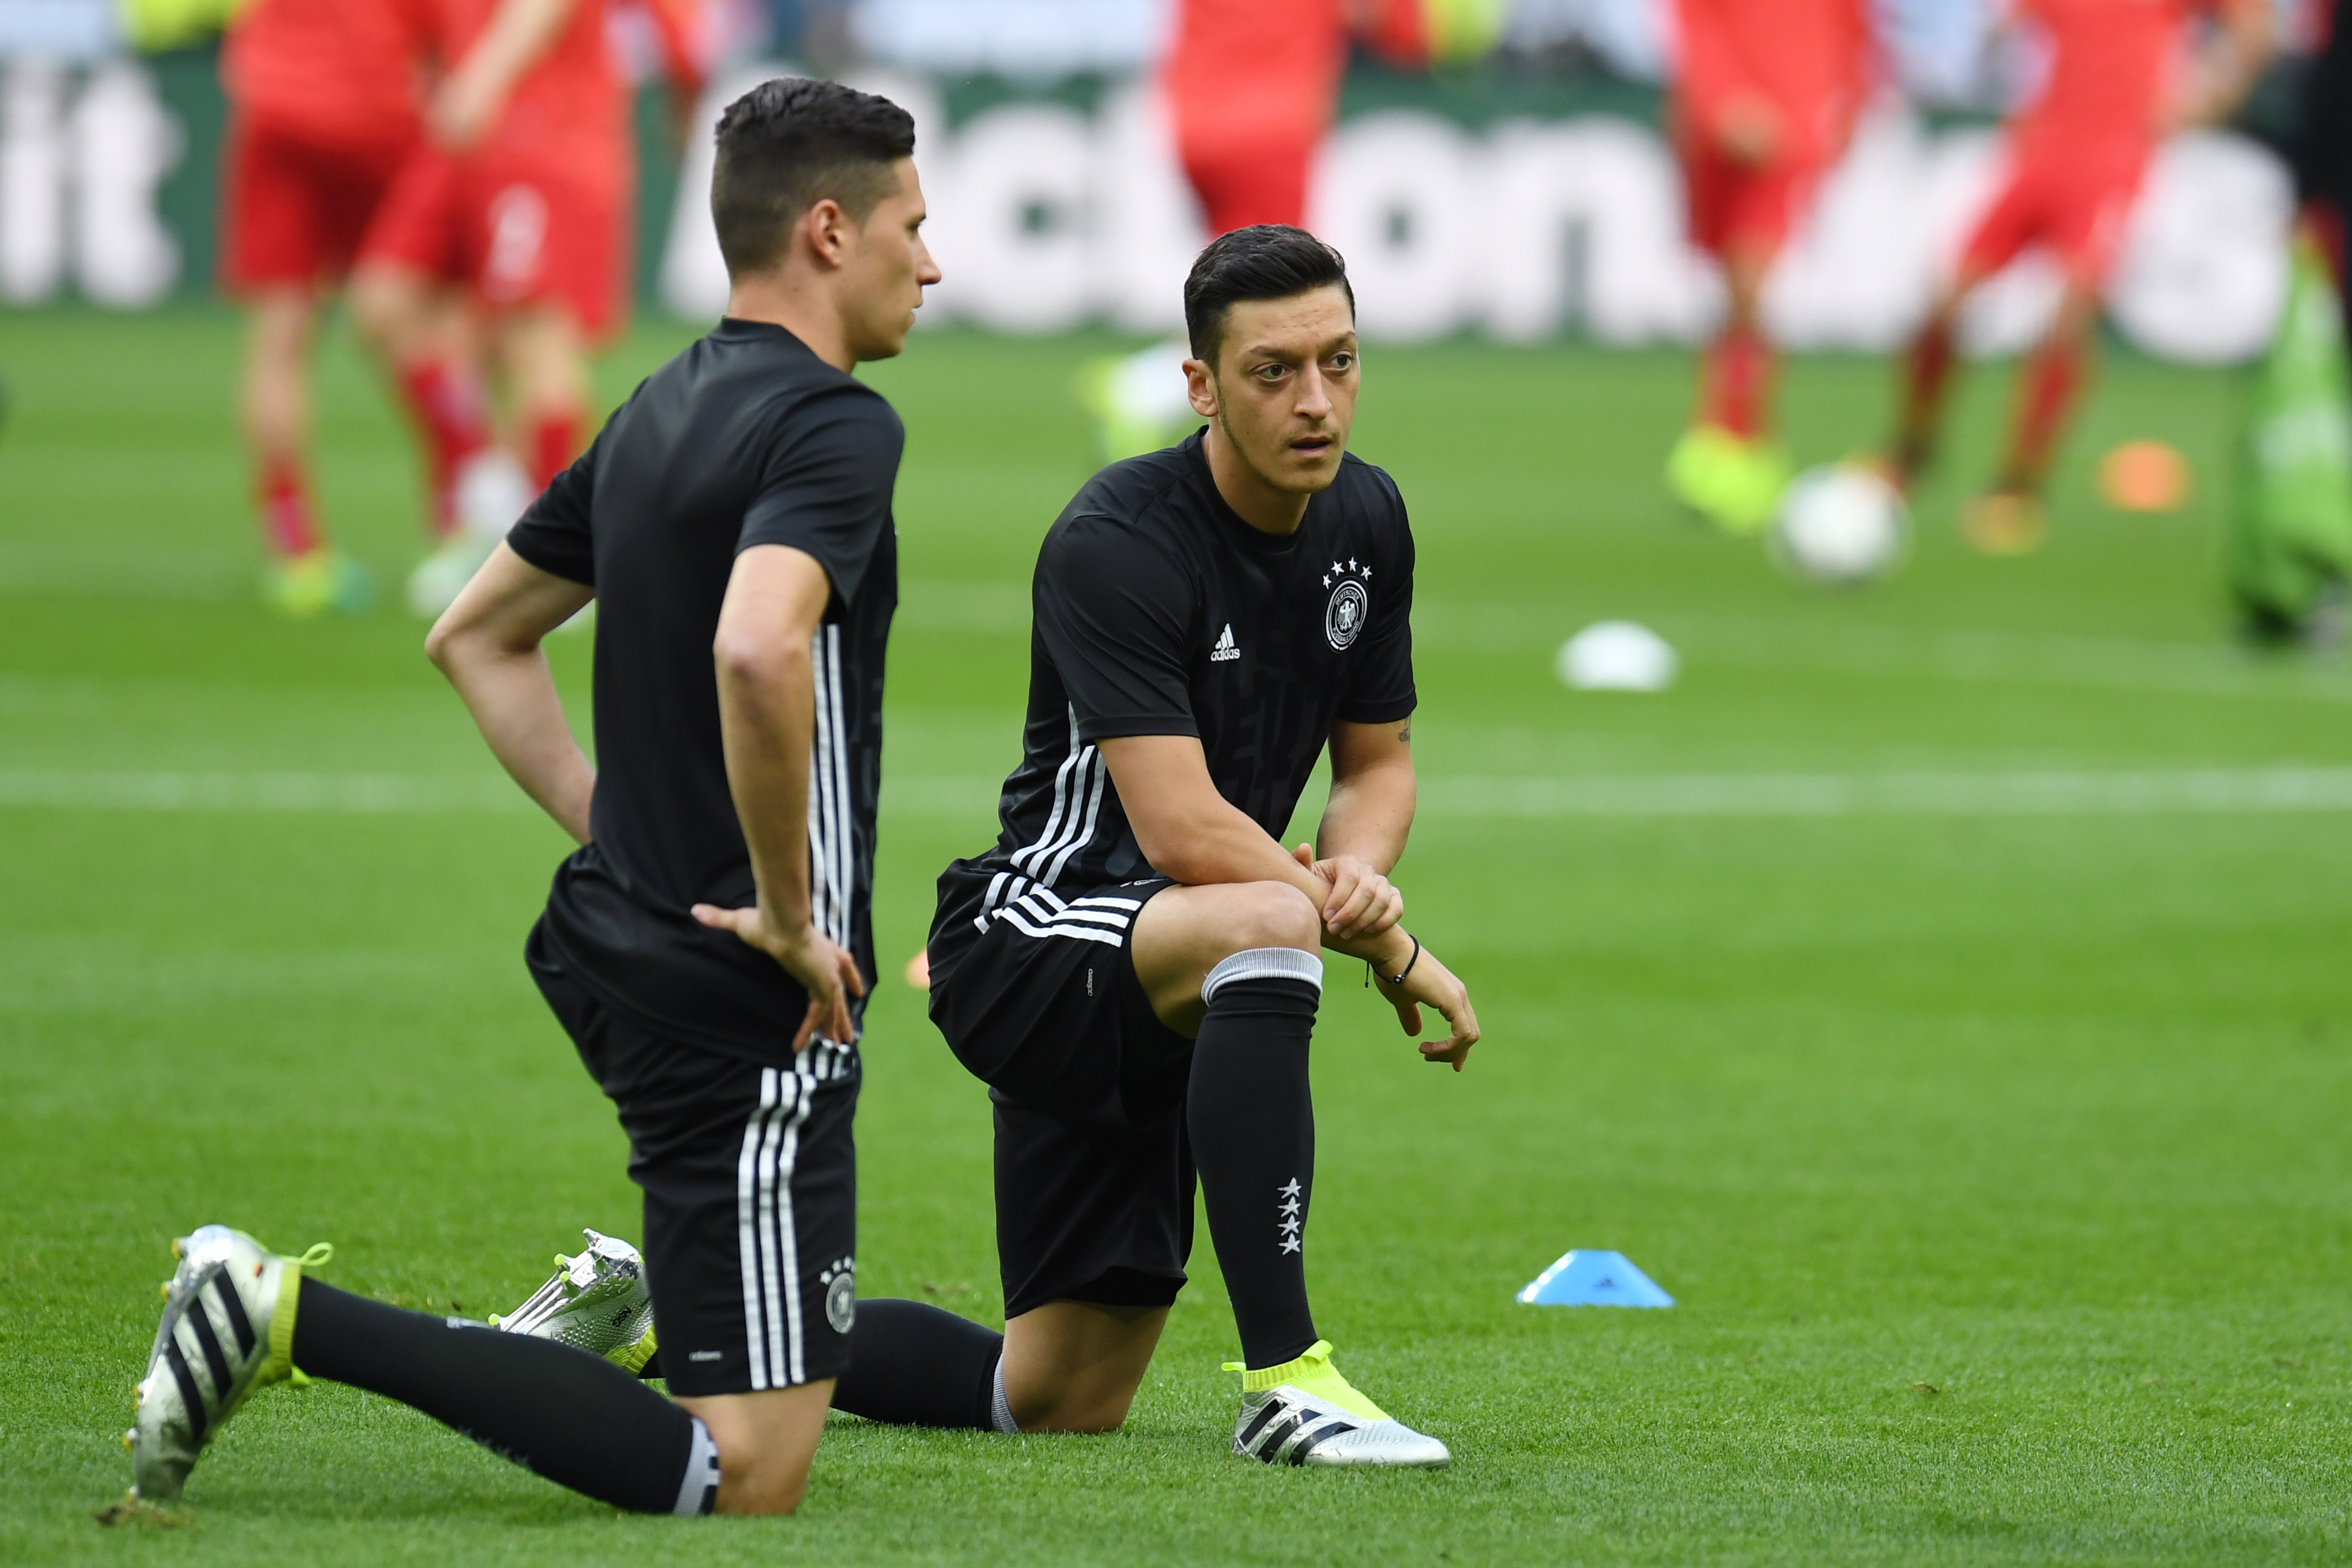 Germany's midfielder Julian Draxler (L) and Germany's midfielder Mesut Oezil warm-up ahead of the Euro 2016 group C football match between Germany and Poland at the Stade de France stadium in Saint-Denis near Paris on June 16, 2016. / AFP / PATRIK STOLLARZ        (Photo credit should read PATRIK STOLLARZ/AFP/Getty Images)